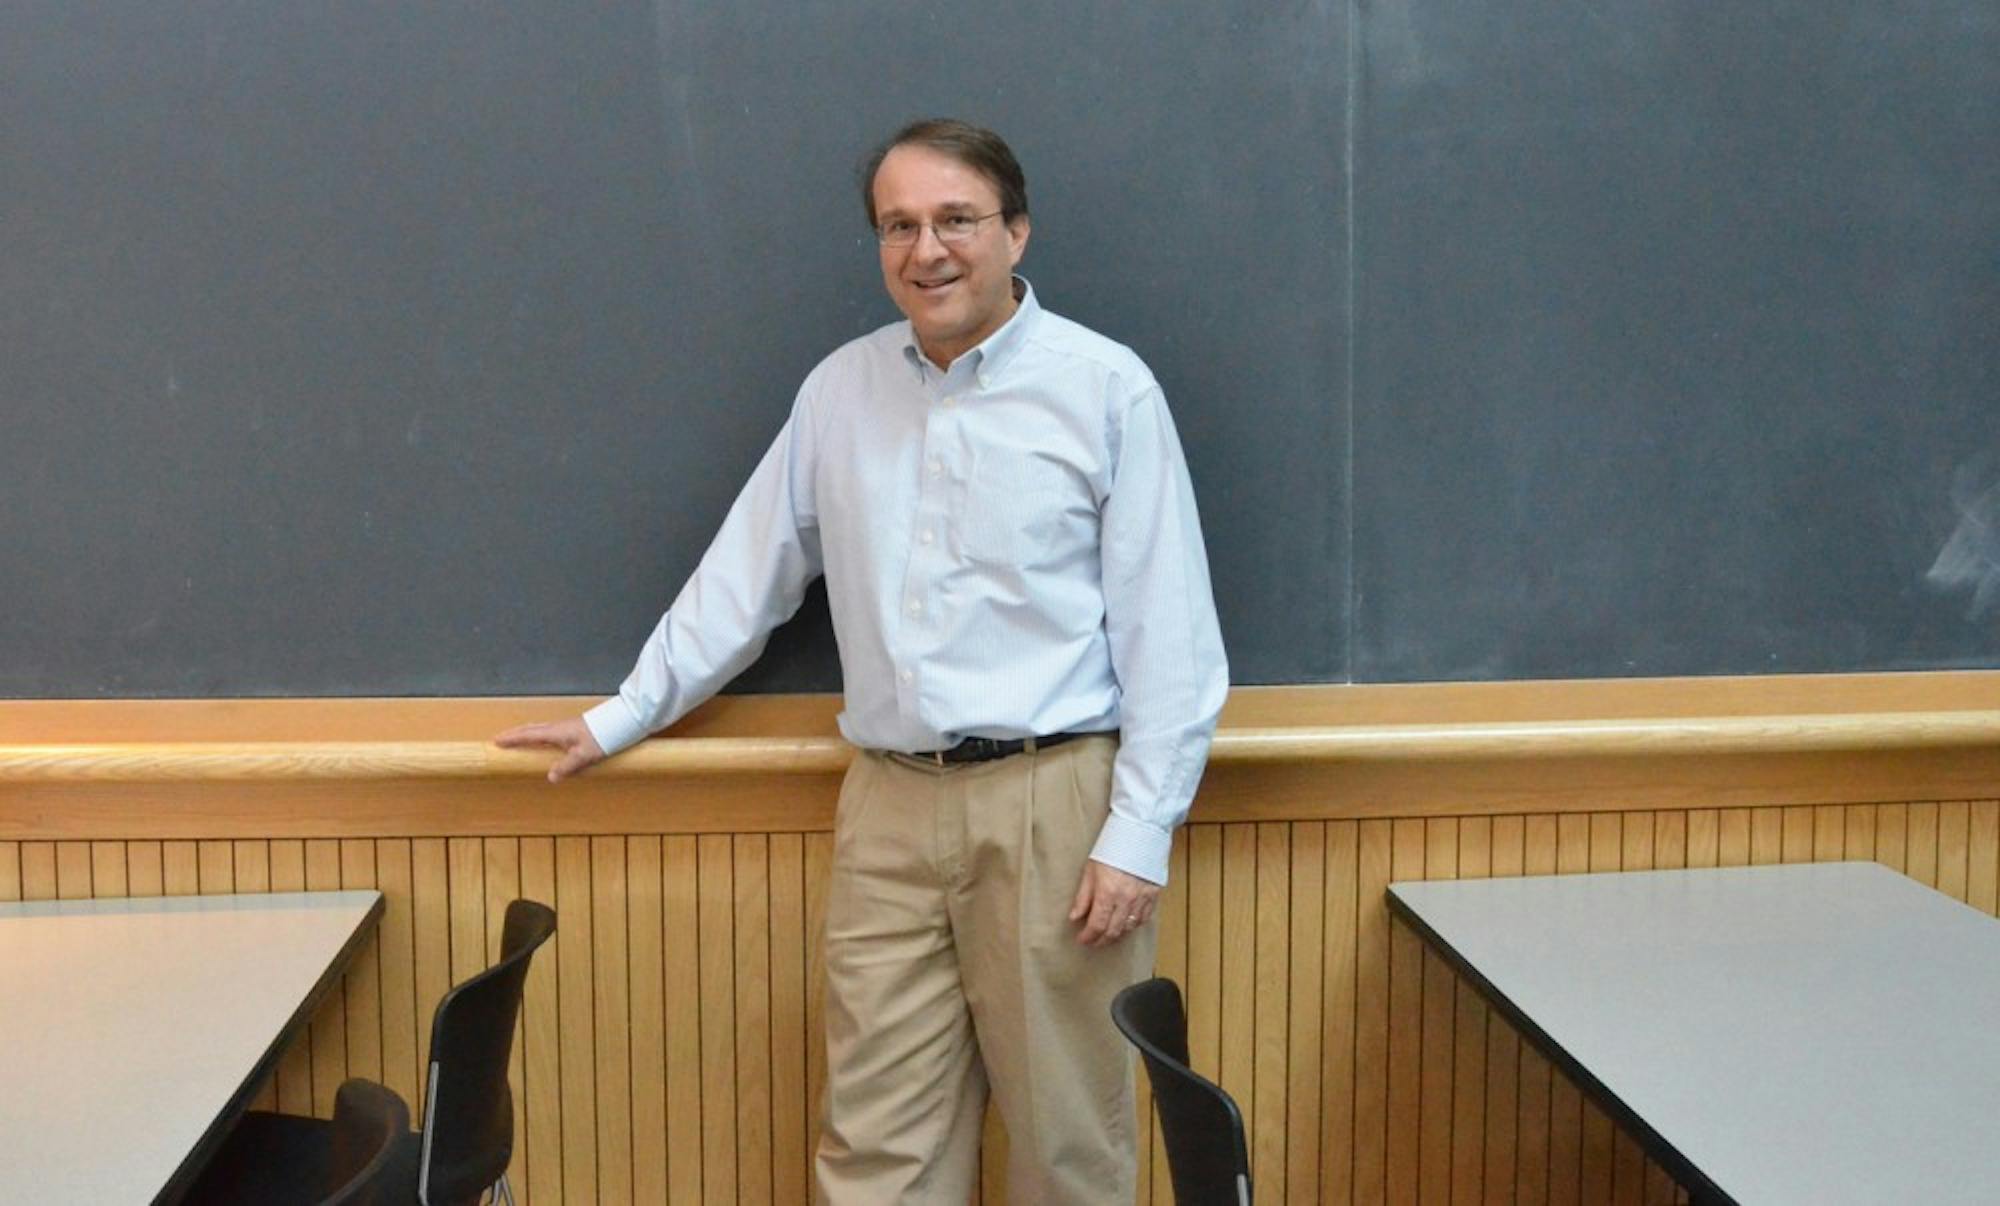 Eonomics professor Douglas Staiger has been teaching at the College since 1998.